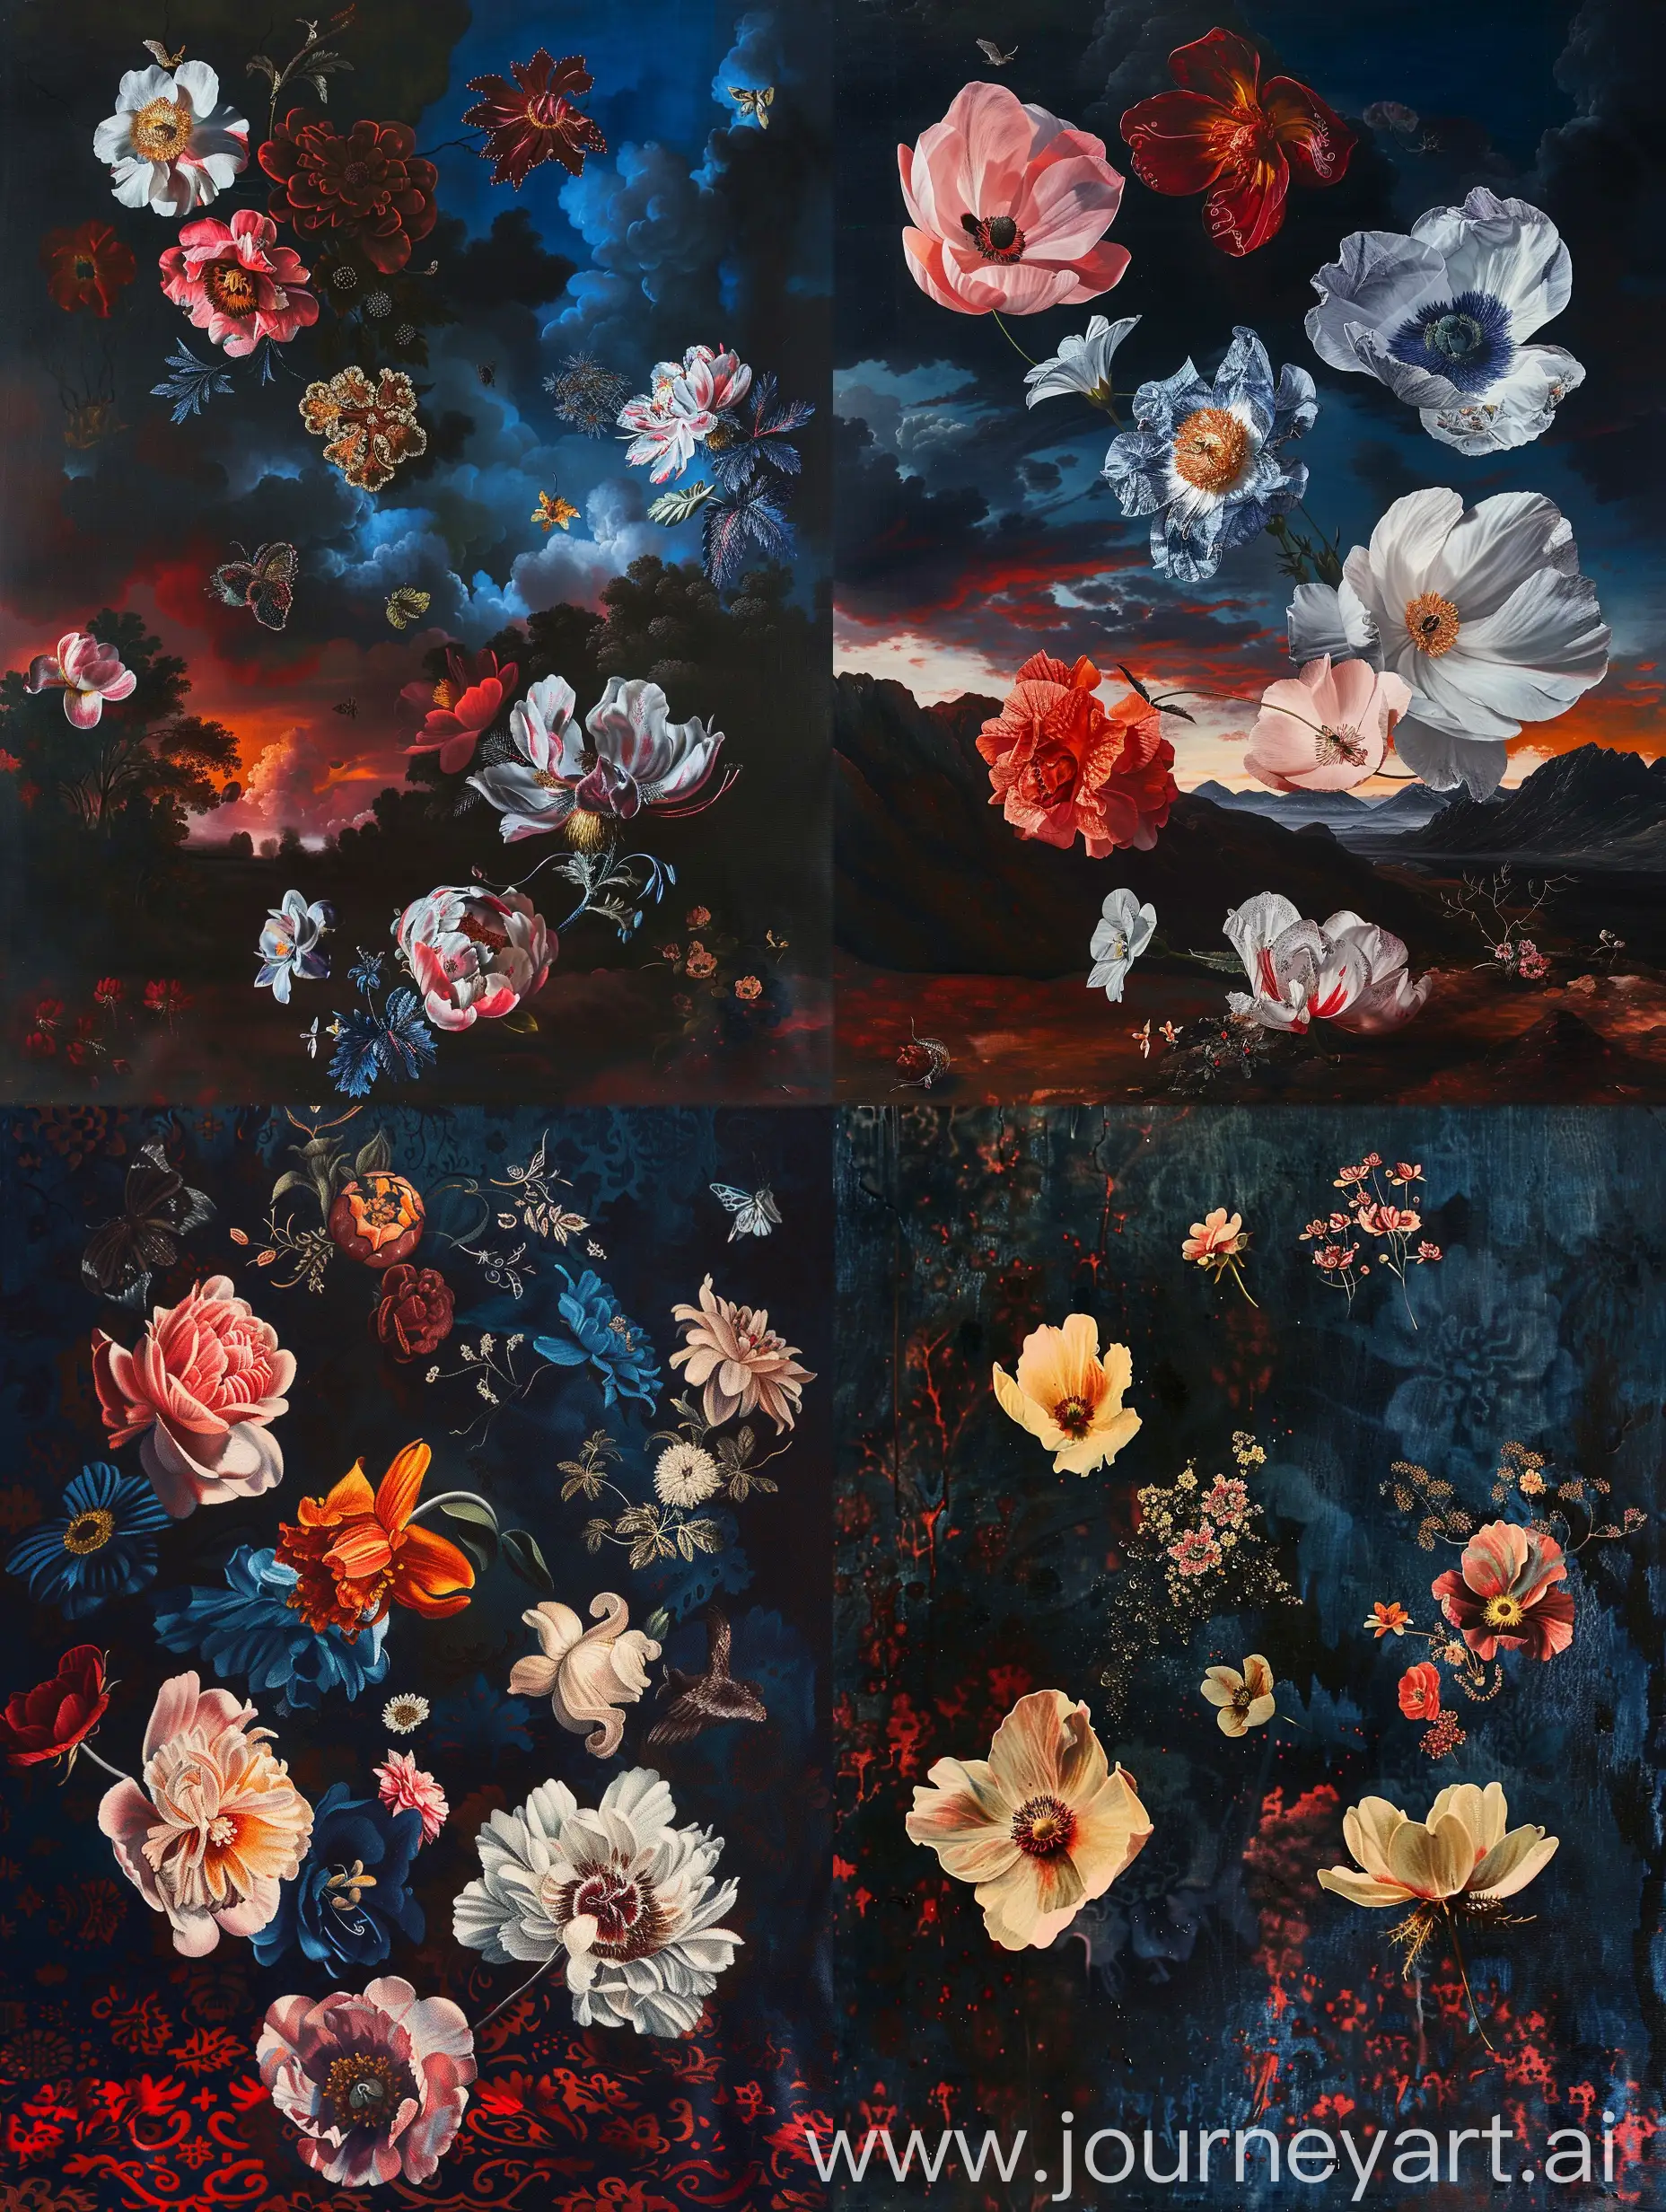 a painting of flowers floating in mid-air, in the style of baroque ornate and dramatic compositions, realistic color schemes, embroidery, caravaggesque chiaroscuro, roccoco flourishes and details, detailed wildlife, dark blue and red, ornate embroidery